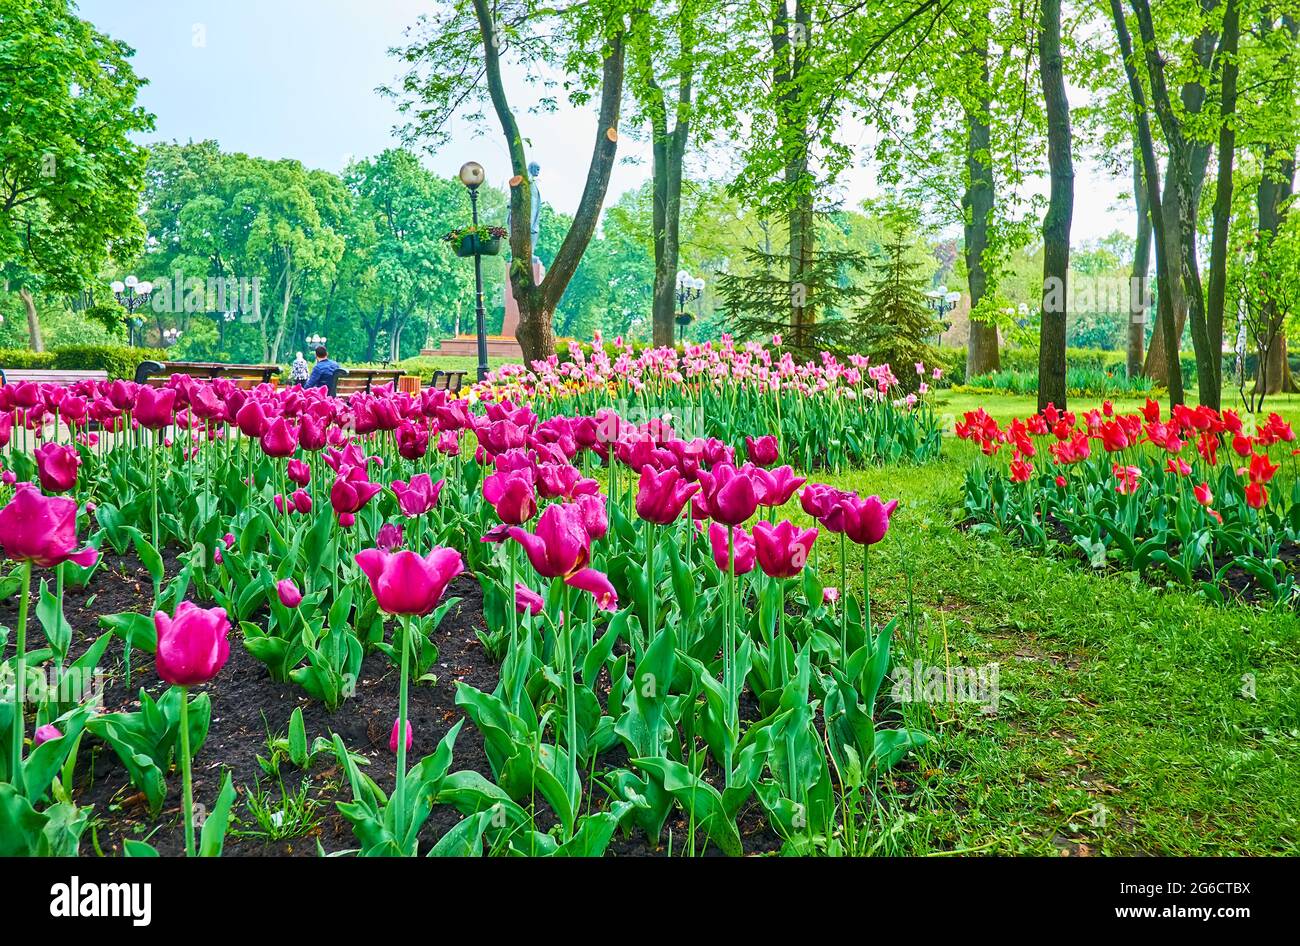 Enjoy the spring in Taras Shevchenko Park with scenic tulip flower beds, green lawn, lush trees, vintage benches and a view of the monument through th Stock Photo